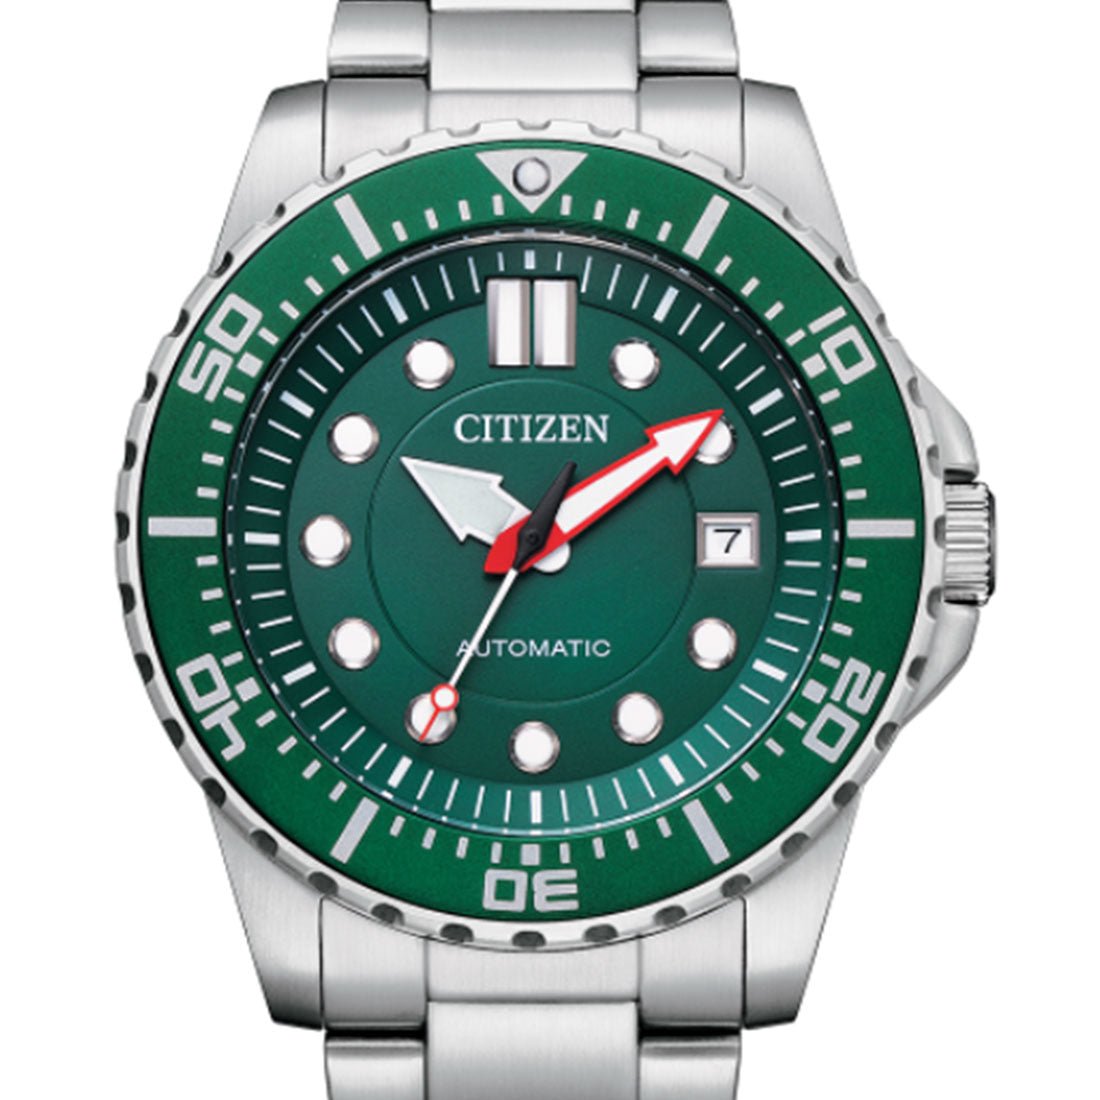 Citizen Promaster NJ0129-87X NJ0129-87 Automatic Green Dial Stainless Steel Sports Watch -Citizen